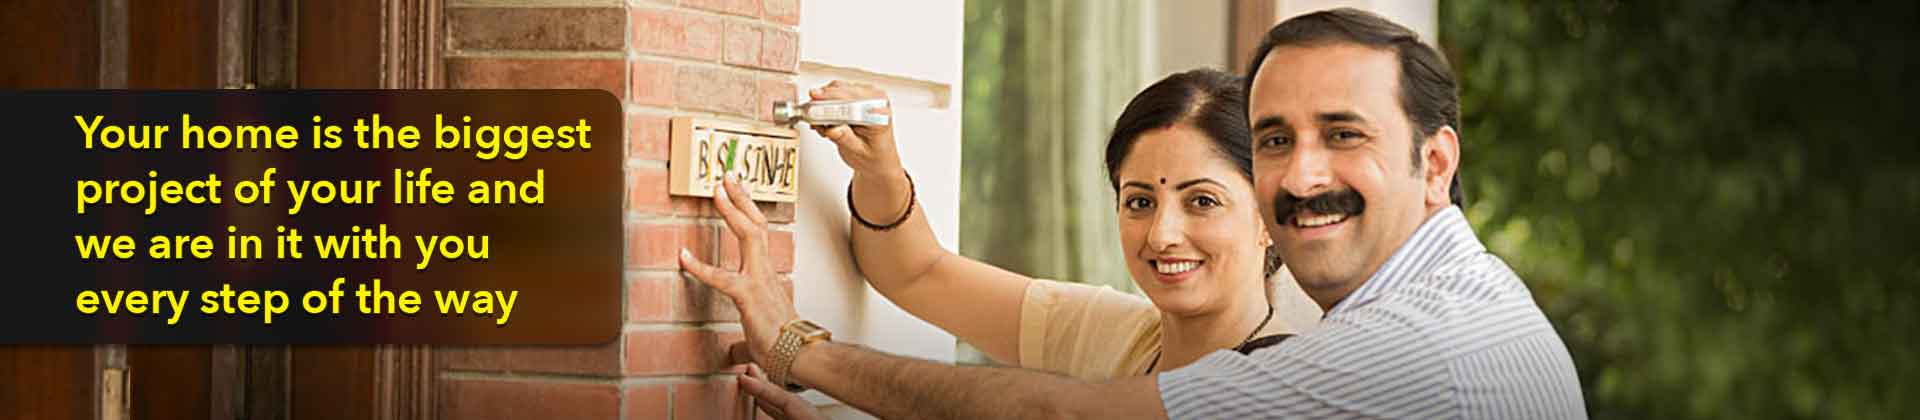 Build a house with UltraTech home building solutions